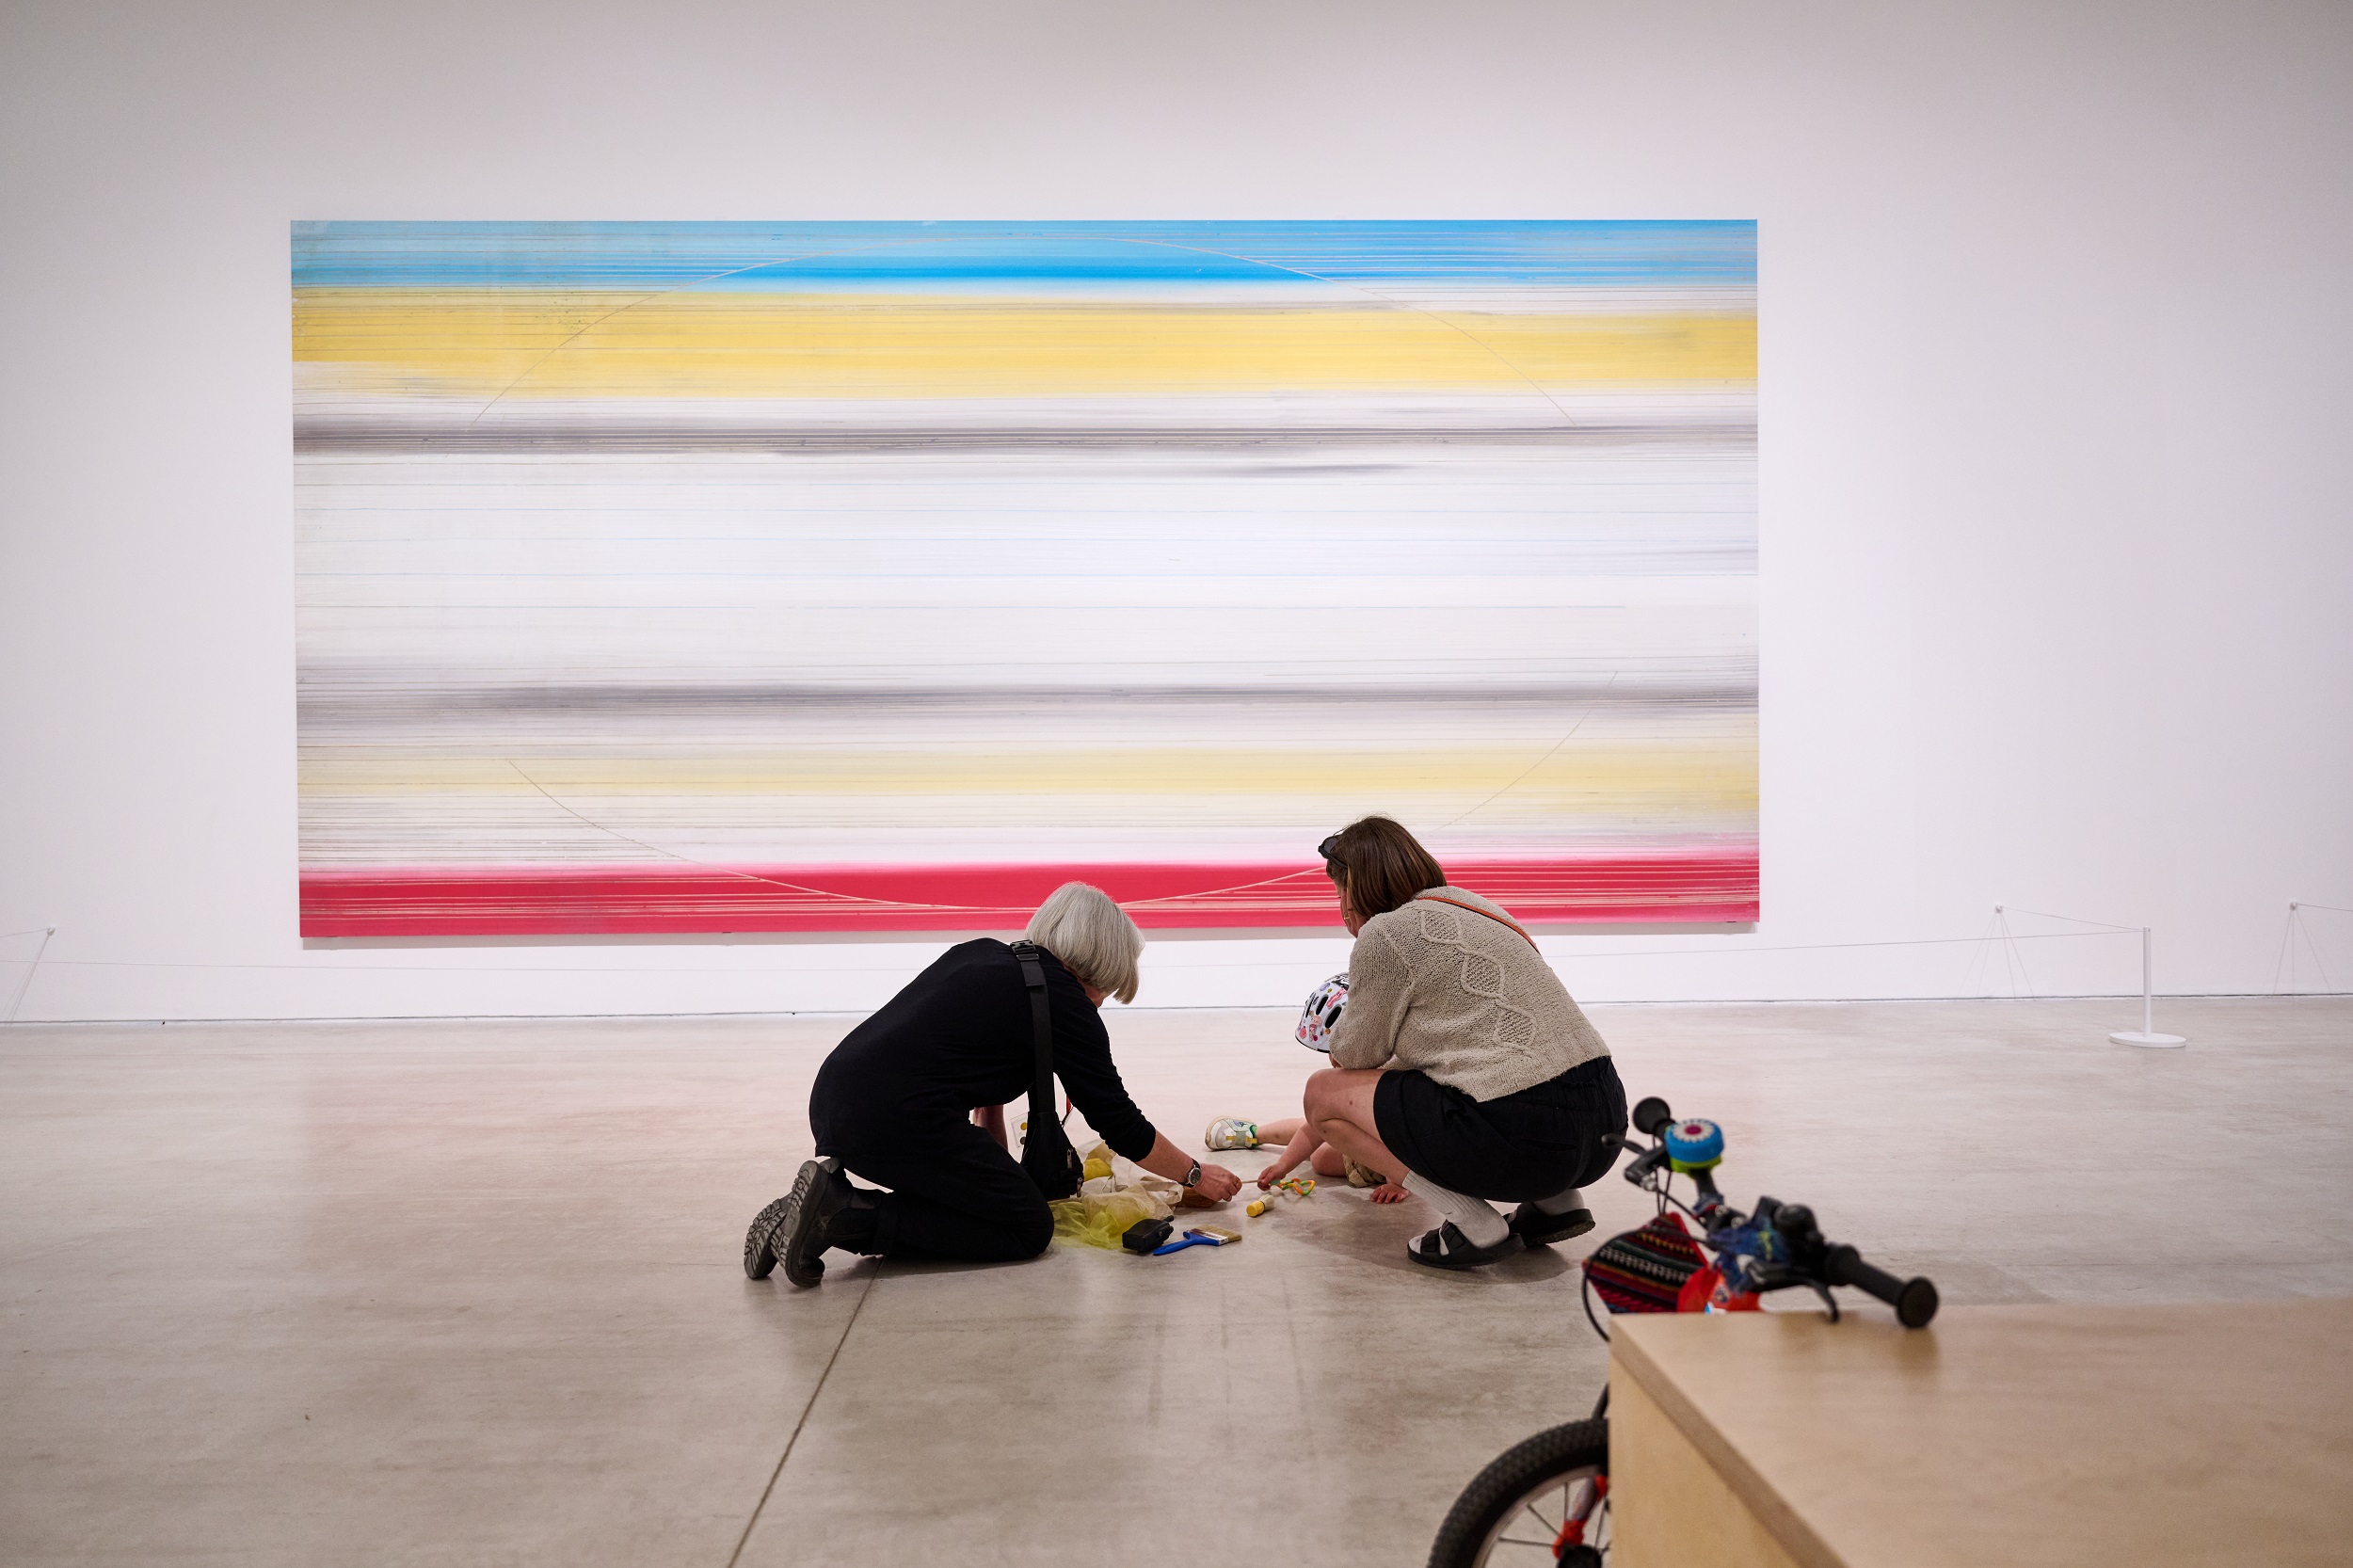 Two adults, one with grey hair, and a young child sit on the floor of a large gallery space in front of a colourful abstract painting. They are playing with the contents of a sensory bag. A bike is propped up against a bench in the foreground.